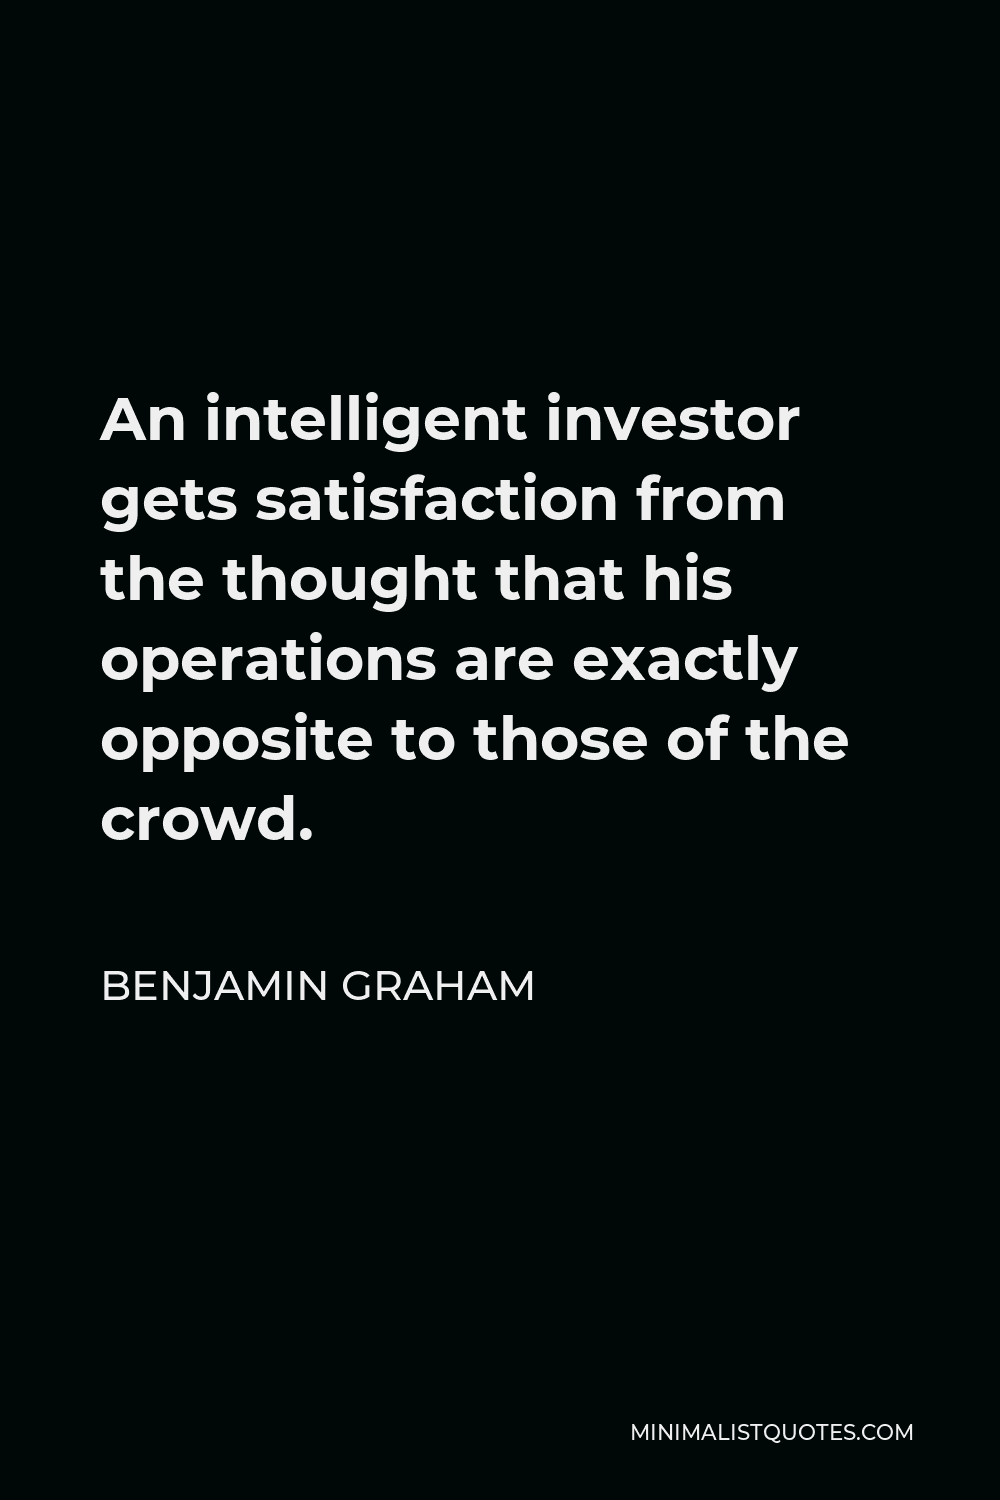 Benjamin Graham Quote - An intelligent investor gets satisfaction from the thought that his operations are exactly opposite to those of the crowd.